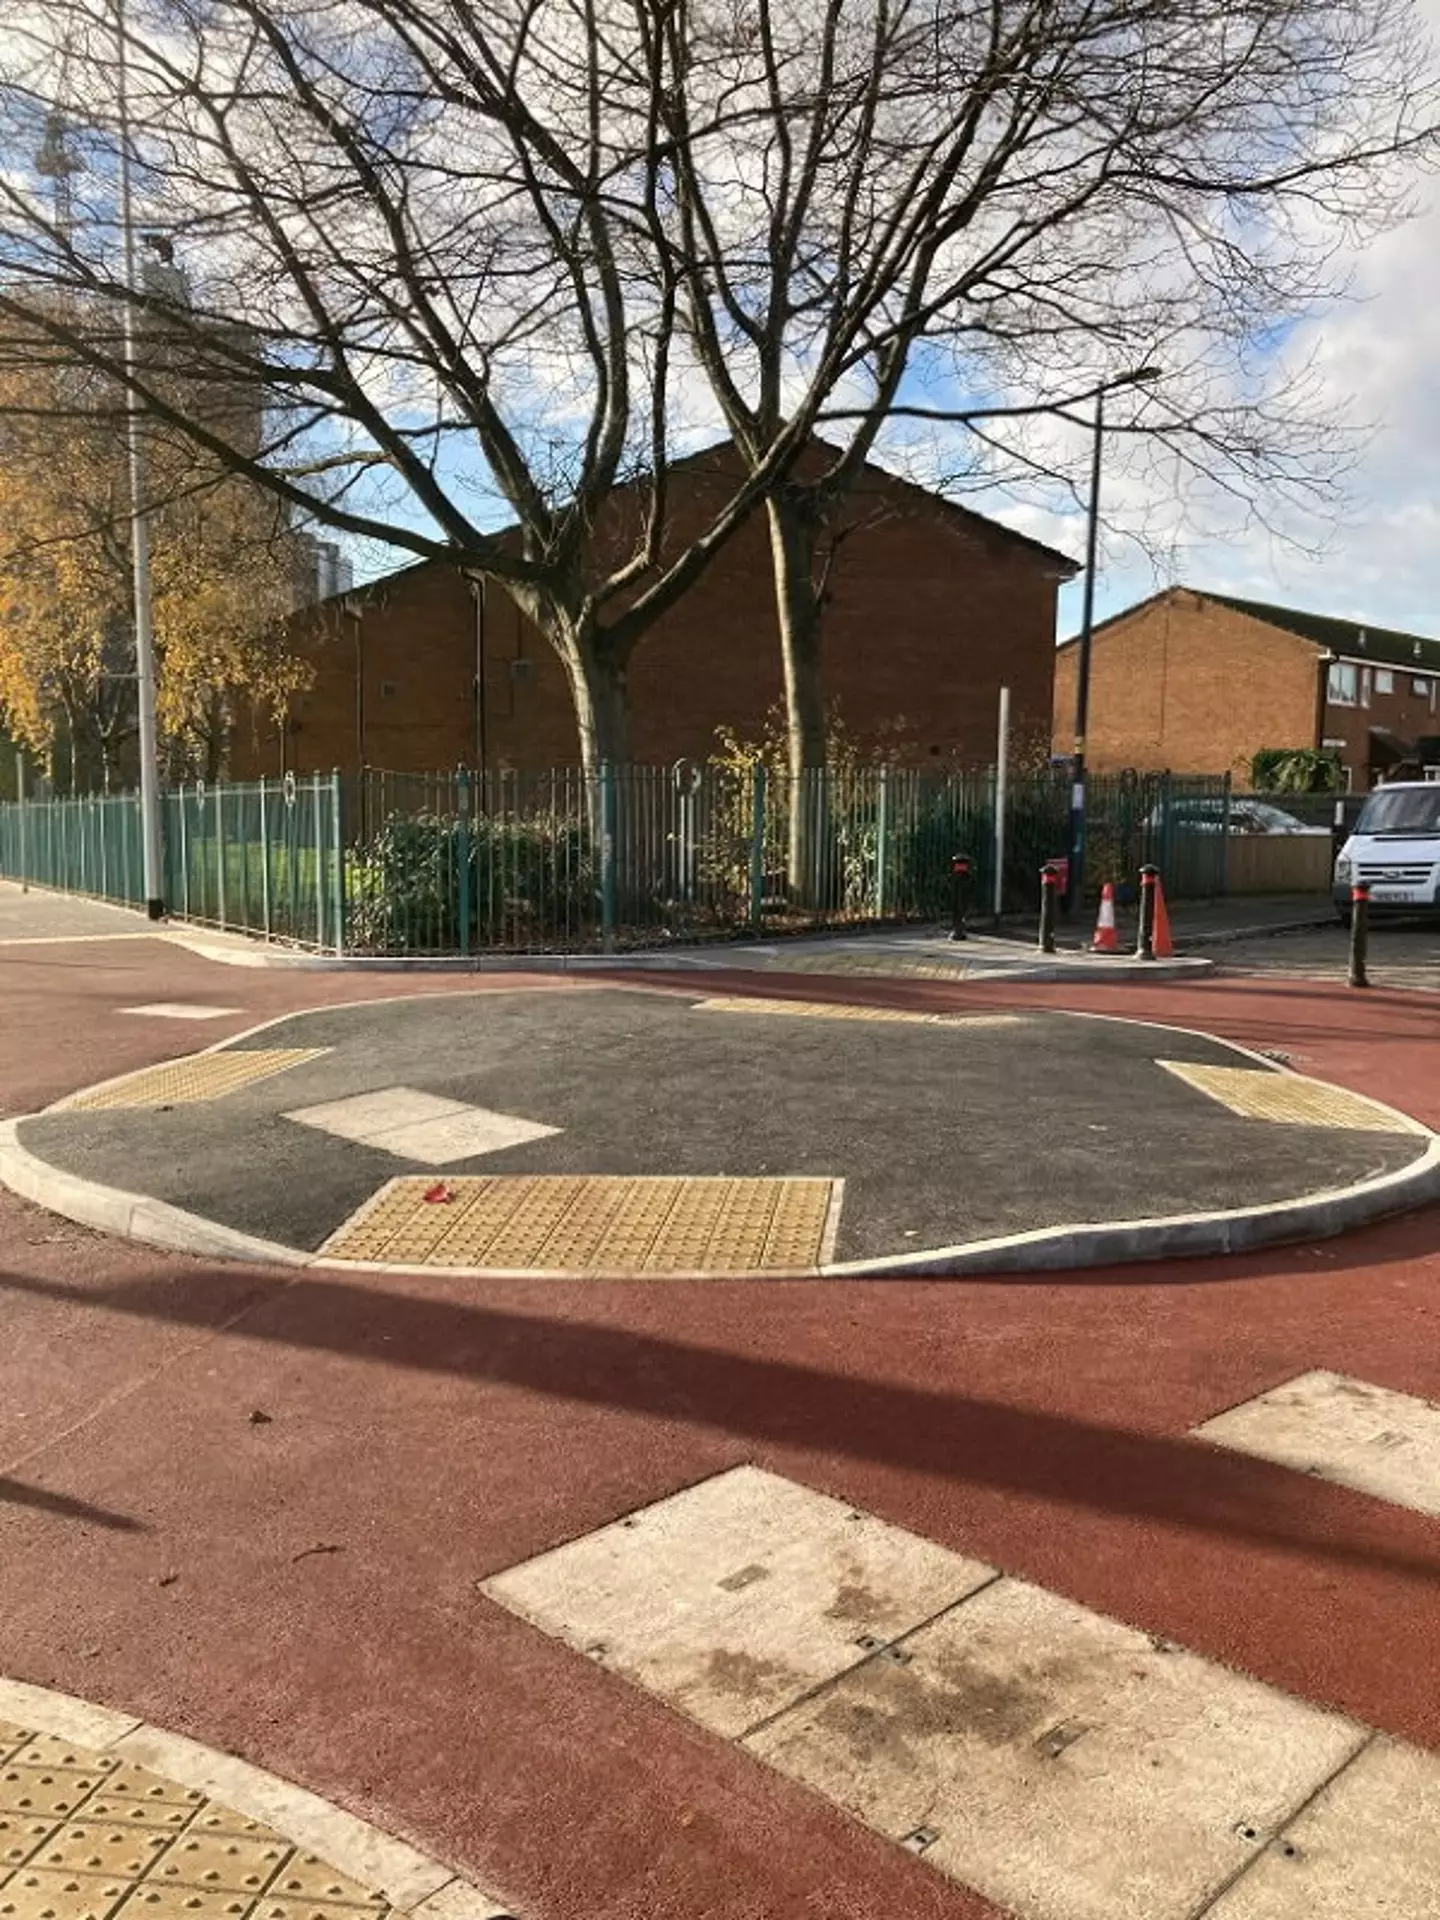 A new bike roundabout said to be the 'first of its kind' has opened in Salford.